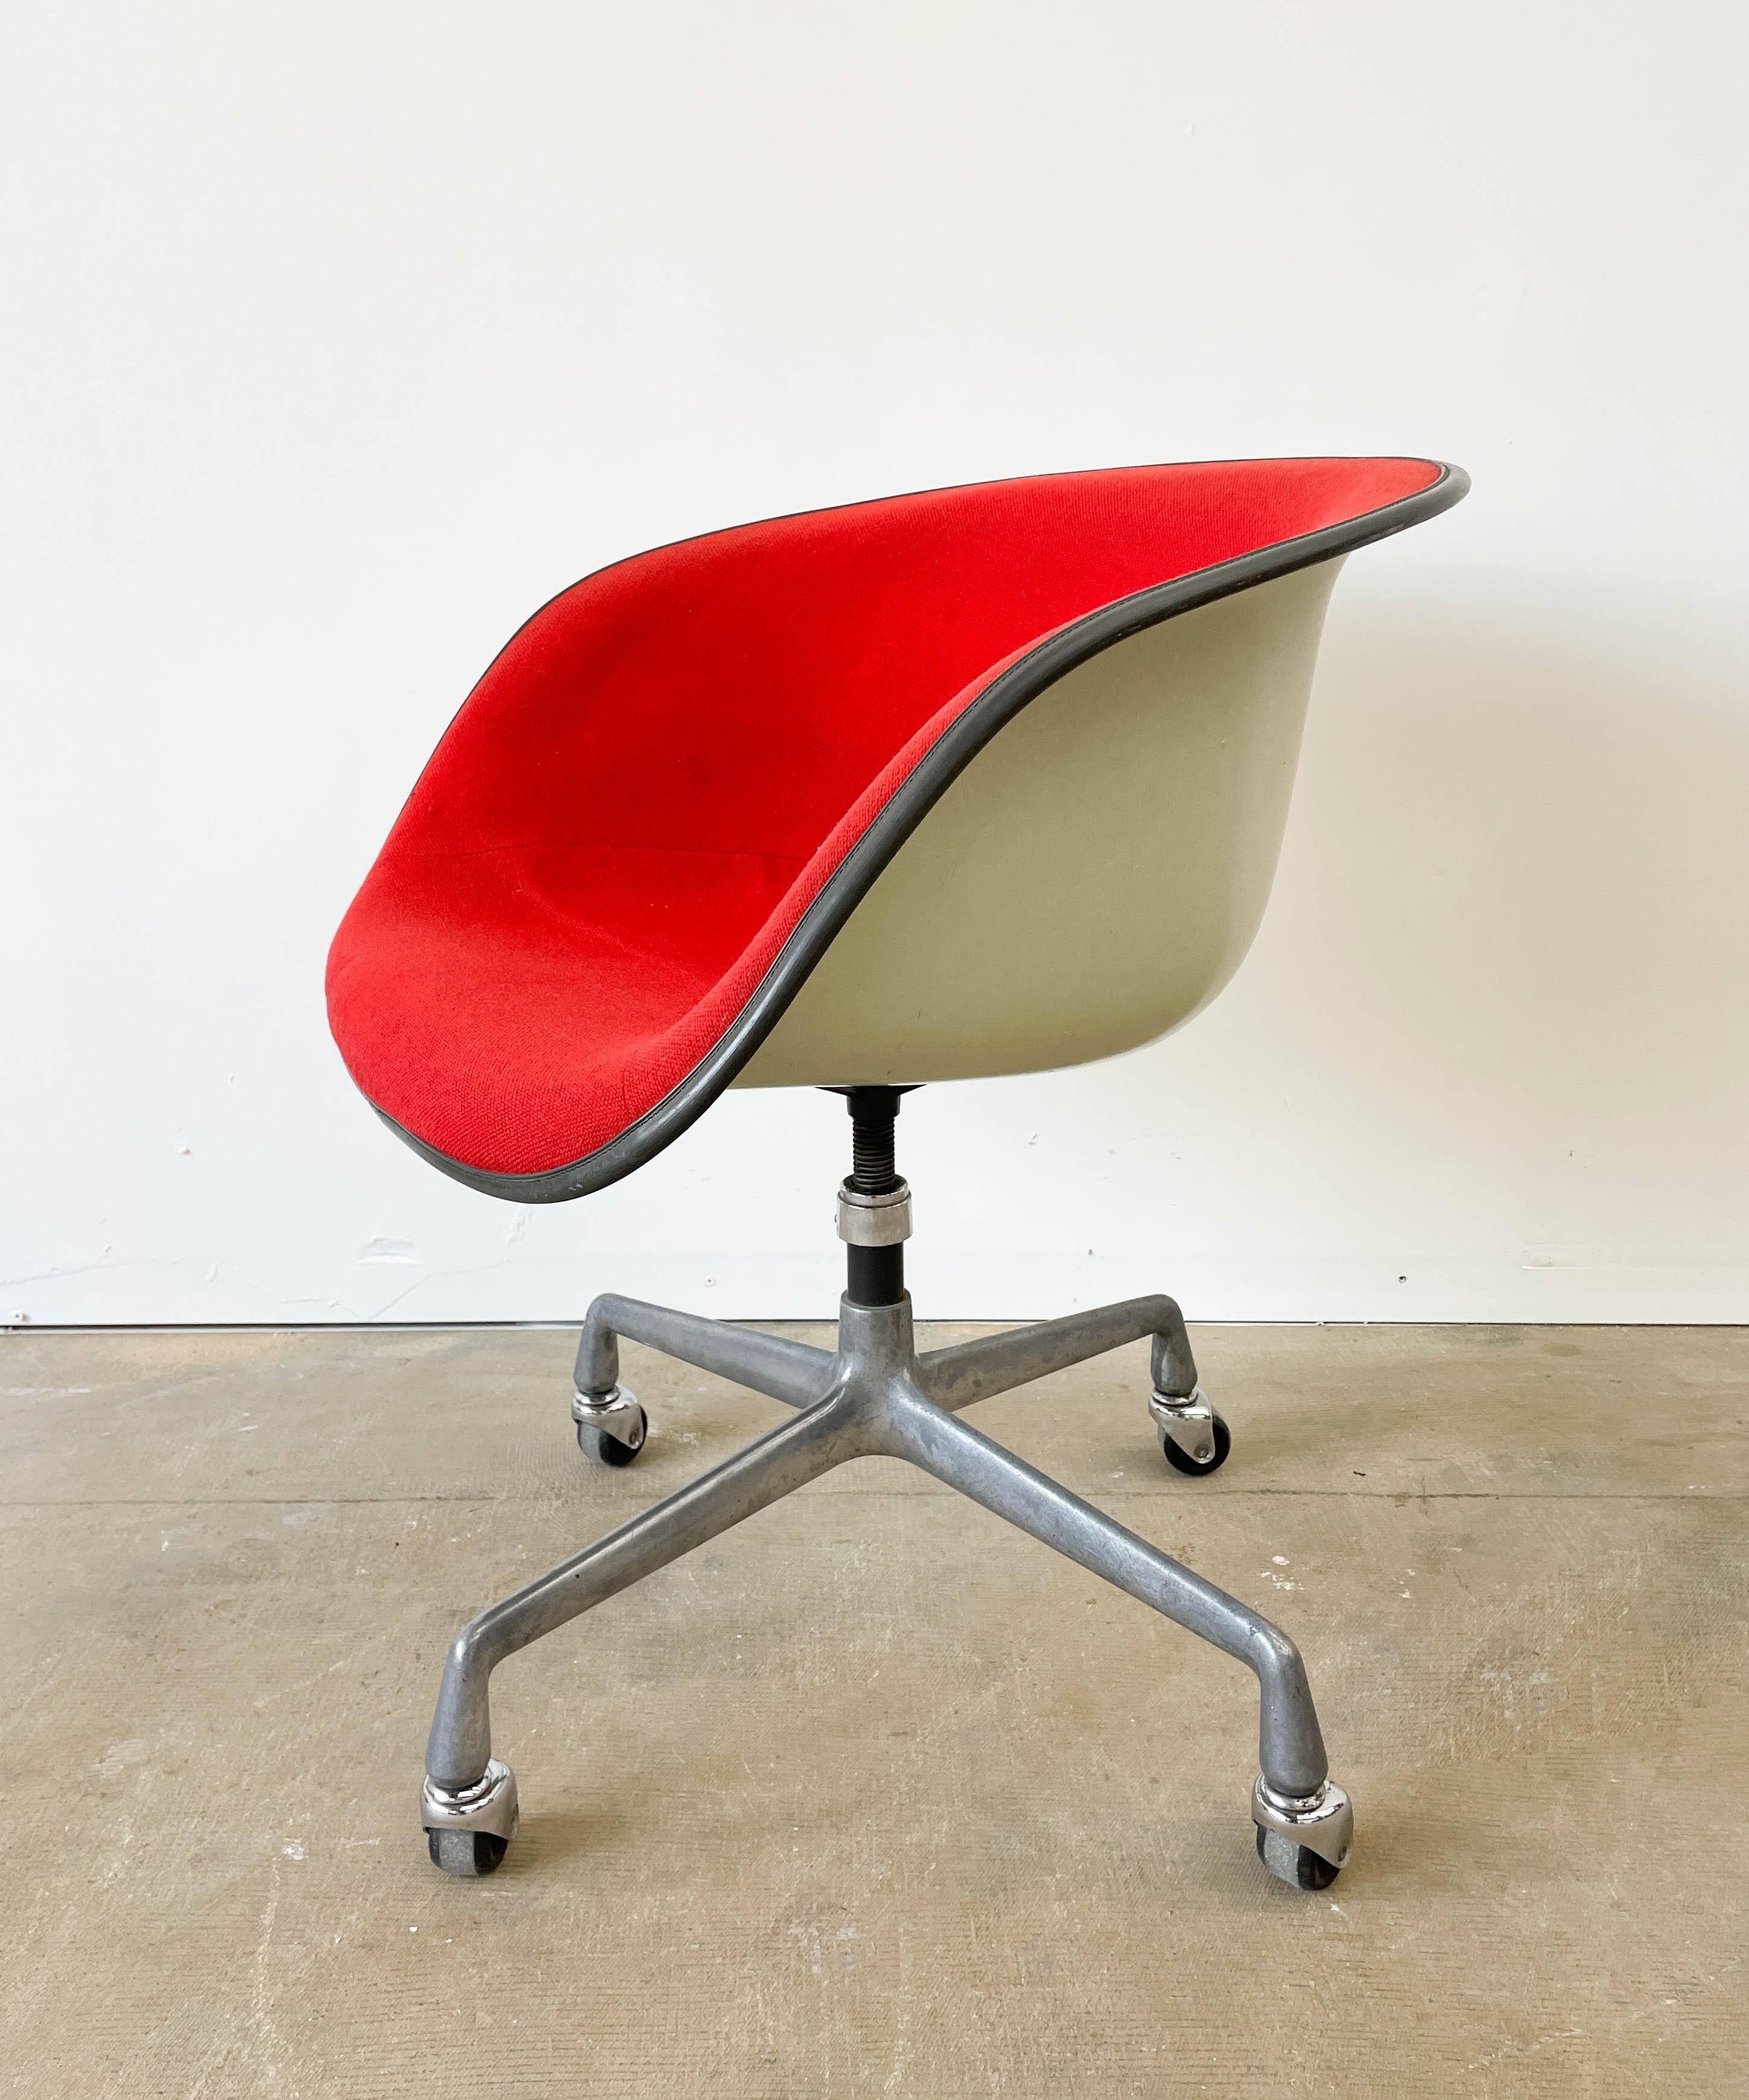 A 1961 piece from Herman Miller, this Eames-designed low-back armchair sits on a swivel and caster base. The piece is made from fiberglass, steel, and bold red fabric. There are minimal stains visible on the fabric, which is original from the 1960s.